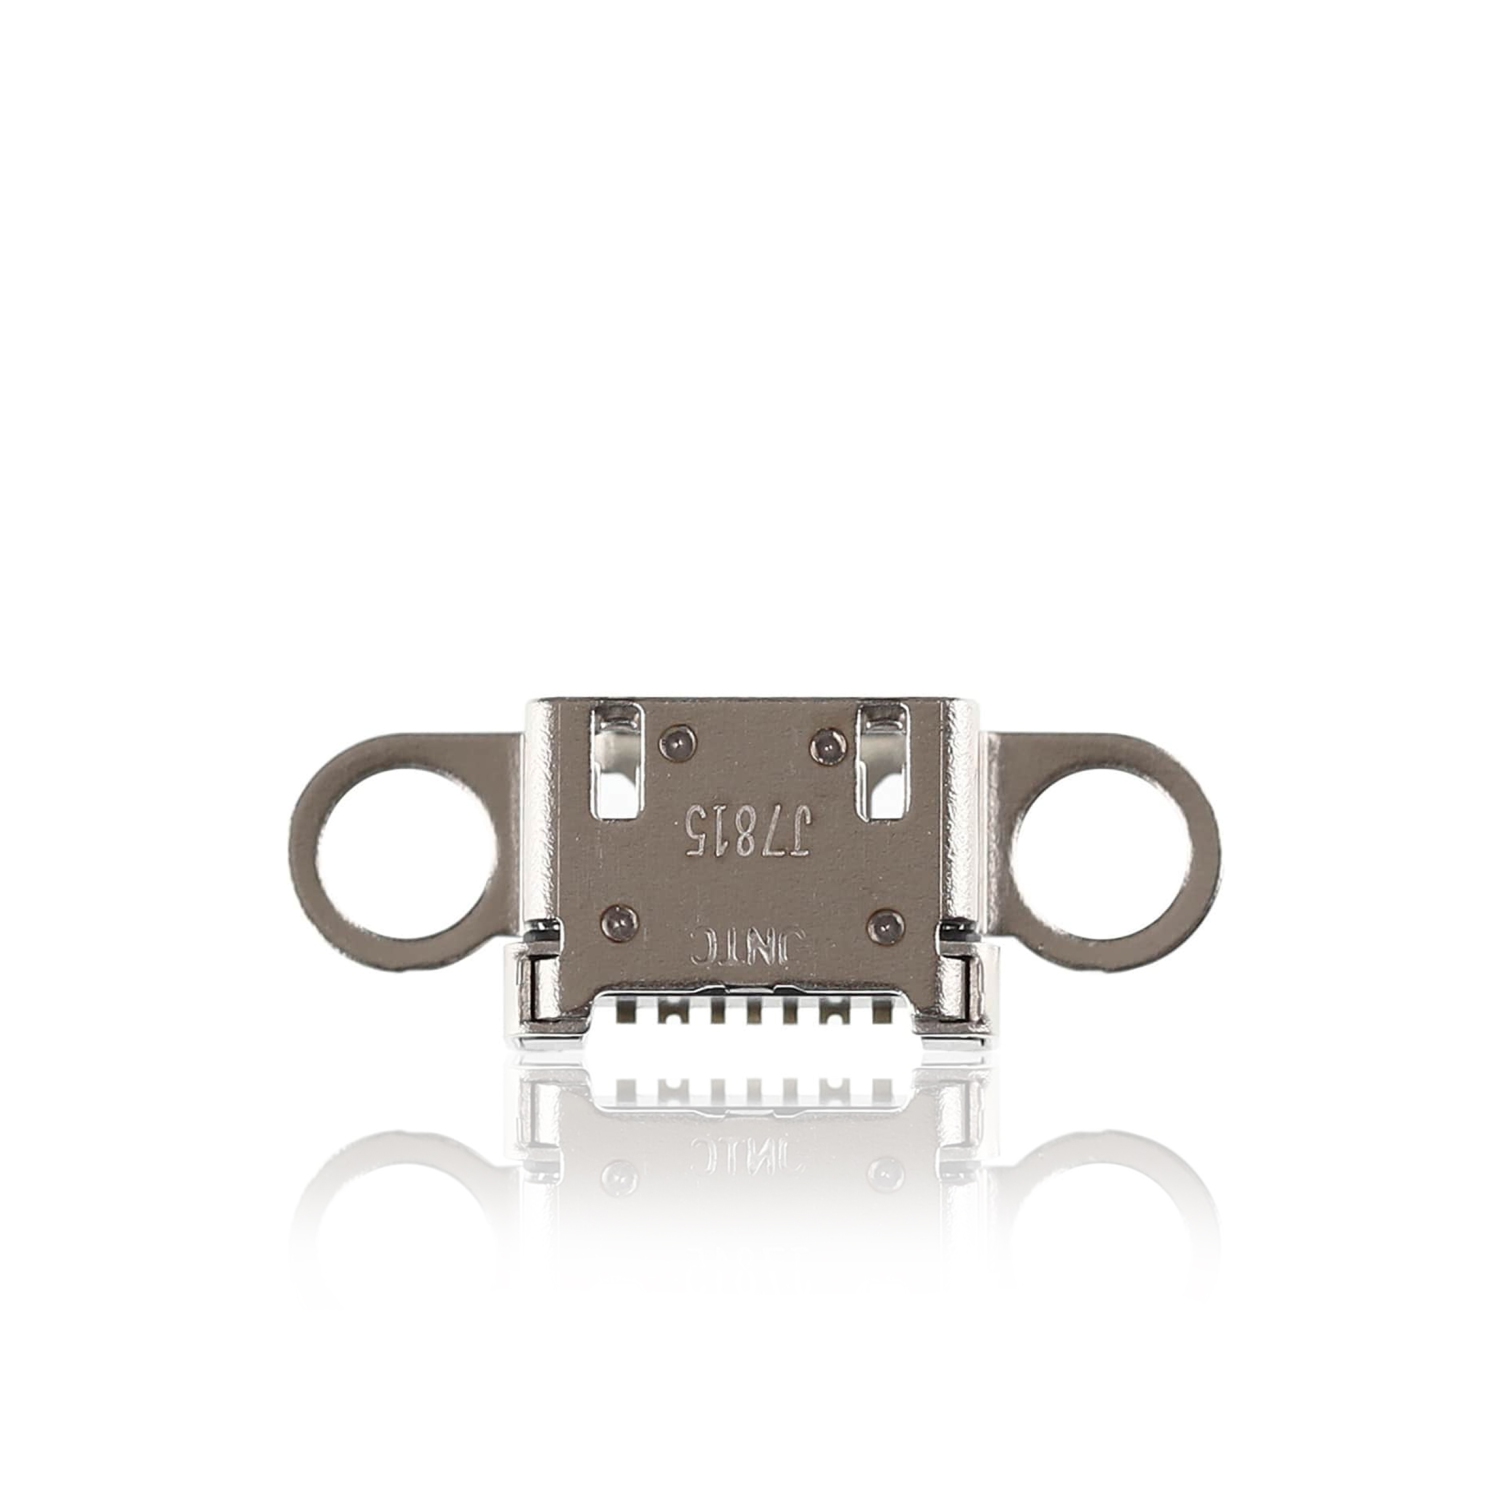 Replacement Charging Port Only Compatible For Samsung Galaxy S6 / S6 Edge / S6 Edge Plus / Note 5 (Soldering Required)